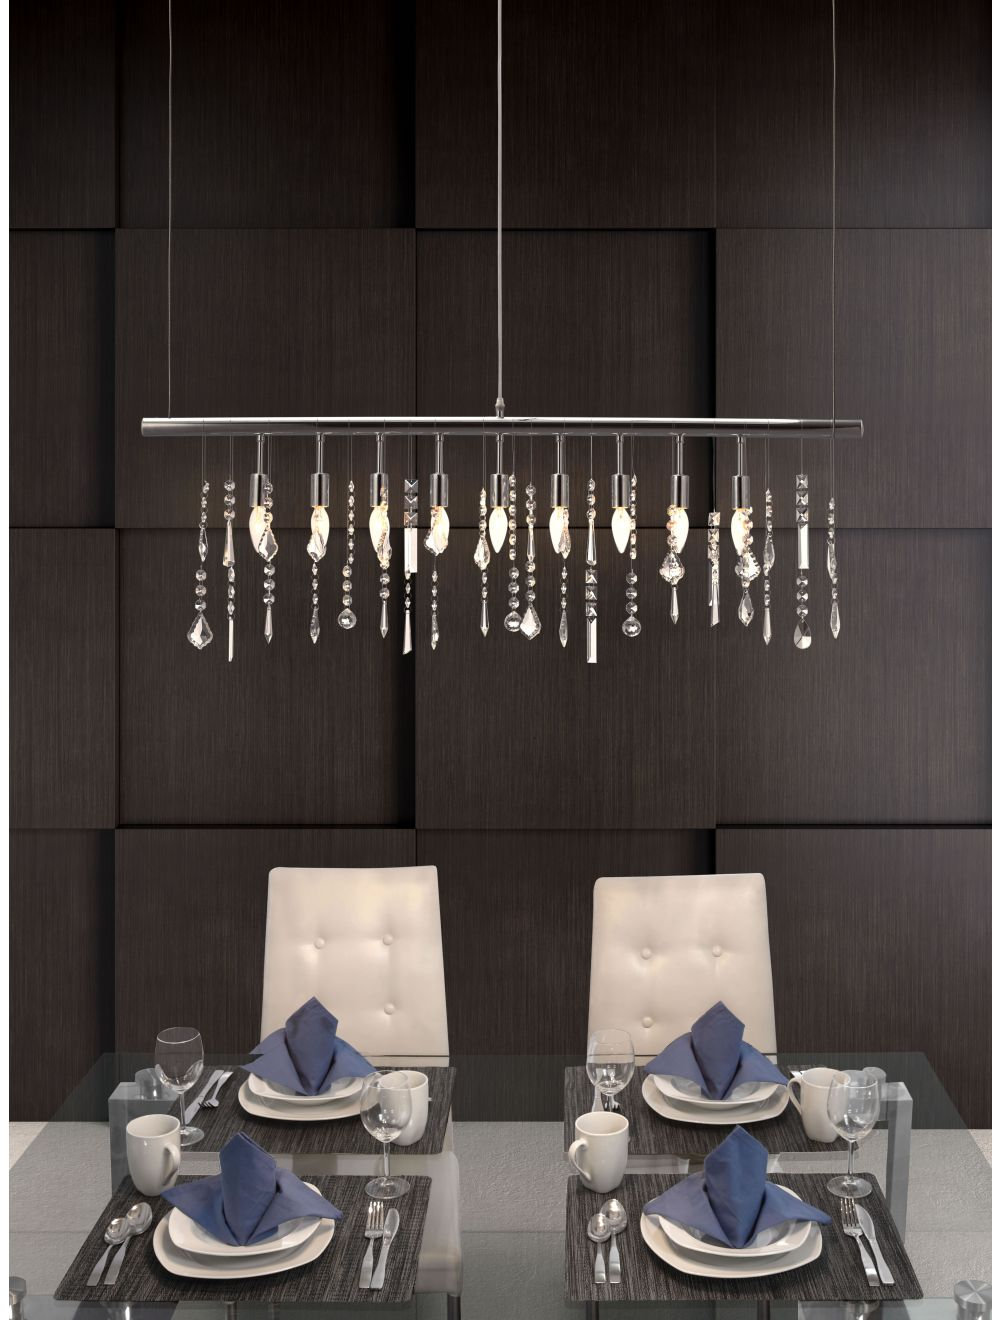 Boho Aesthetic "Modern Glam Icicle Chandelier" | Biophilic Design Airbnb Decor Furniture 